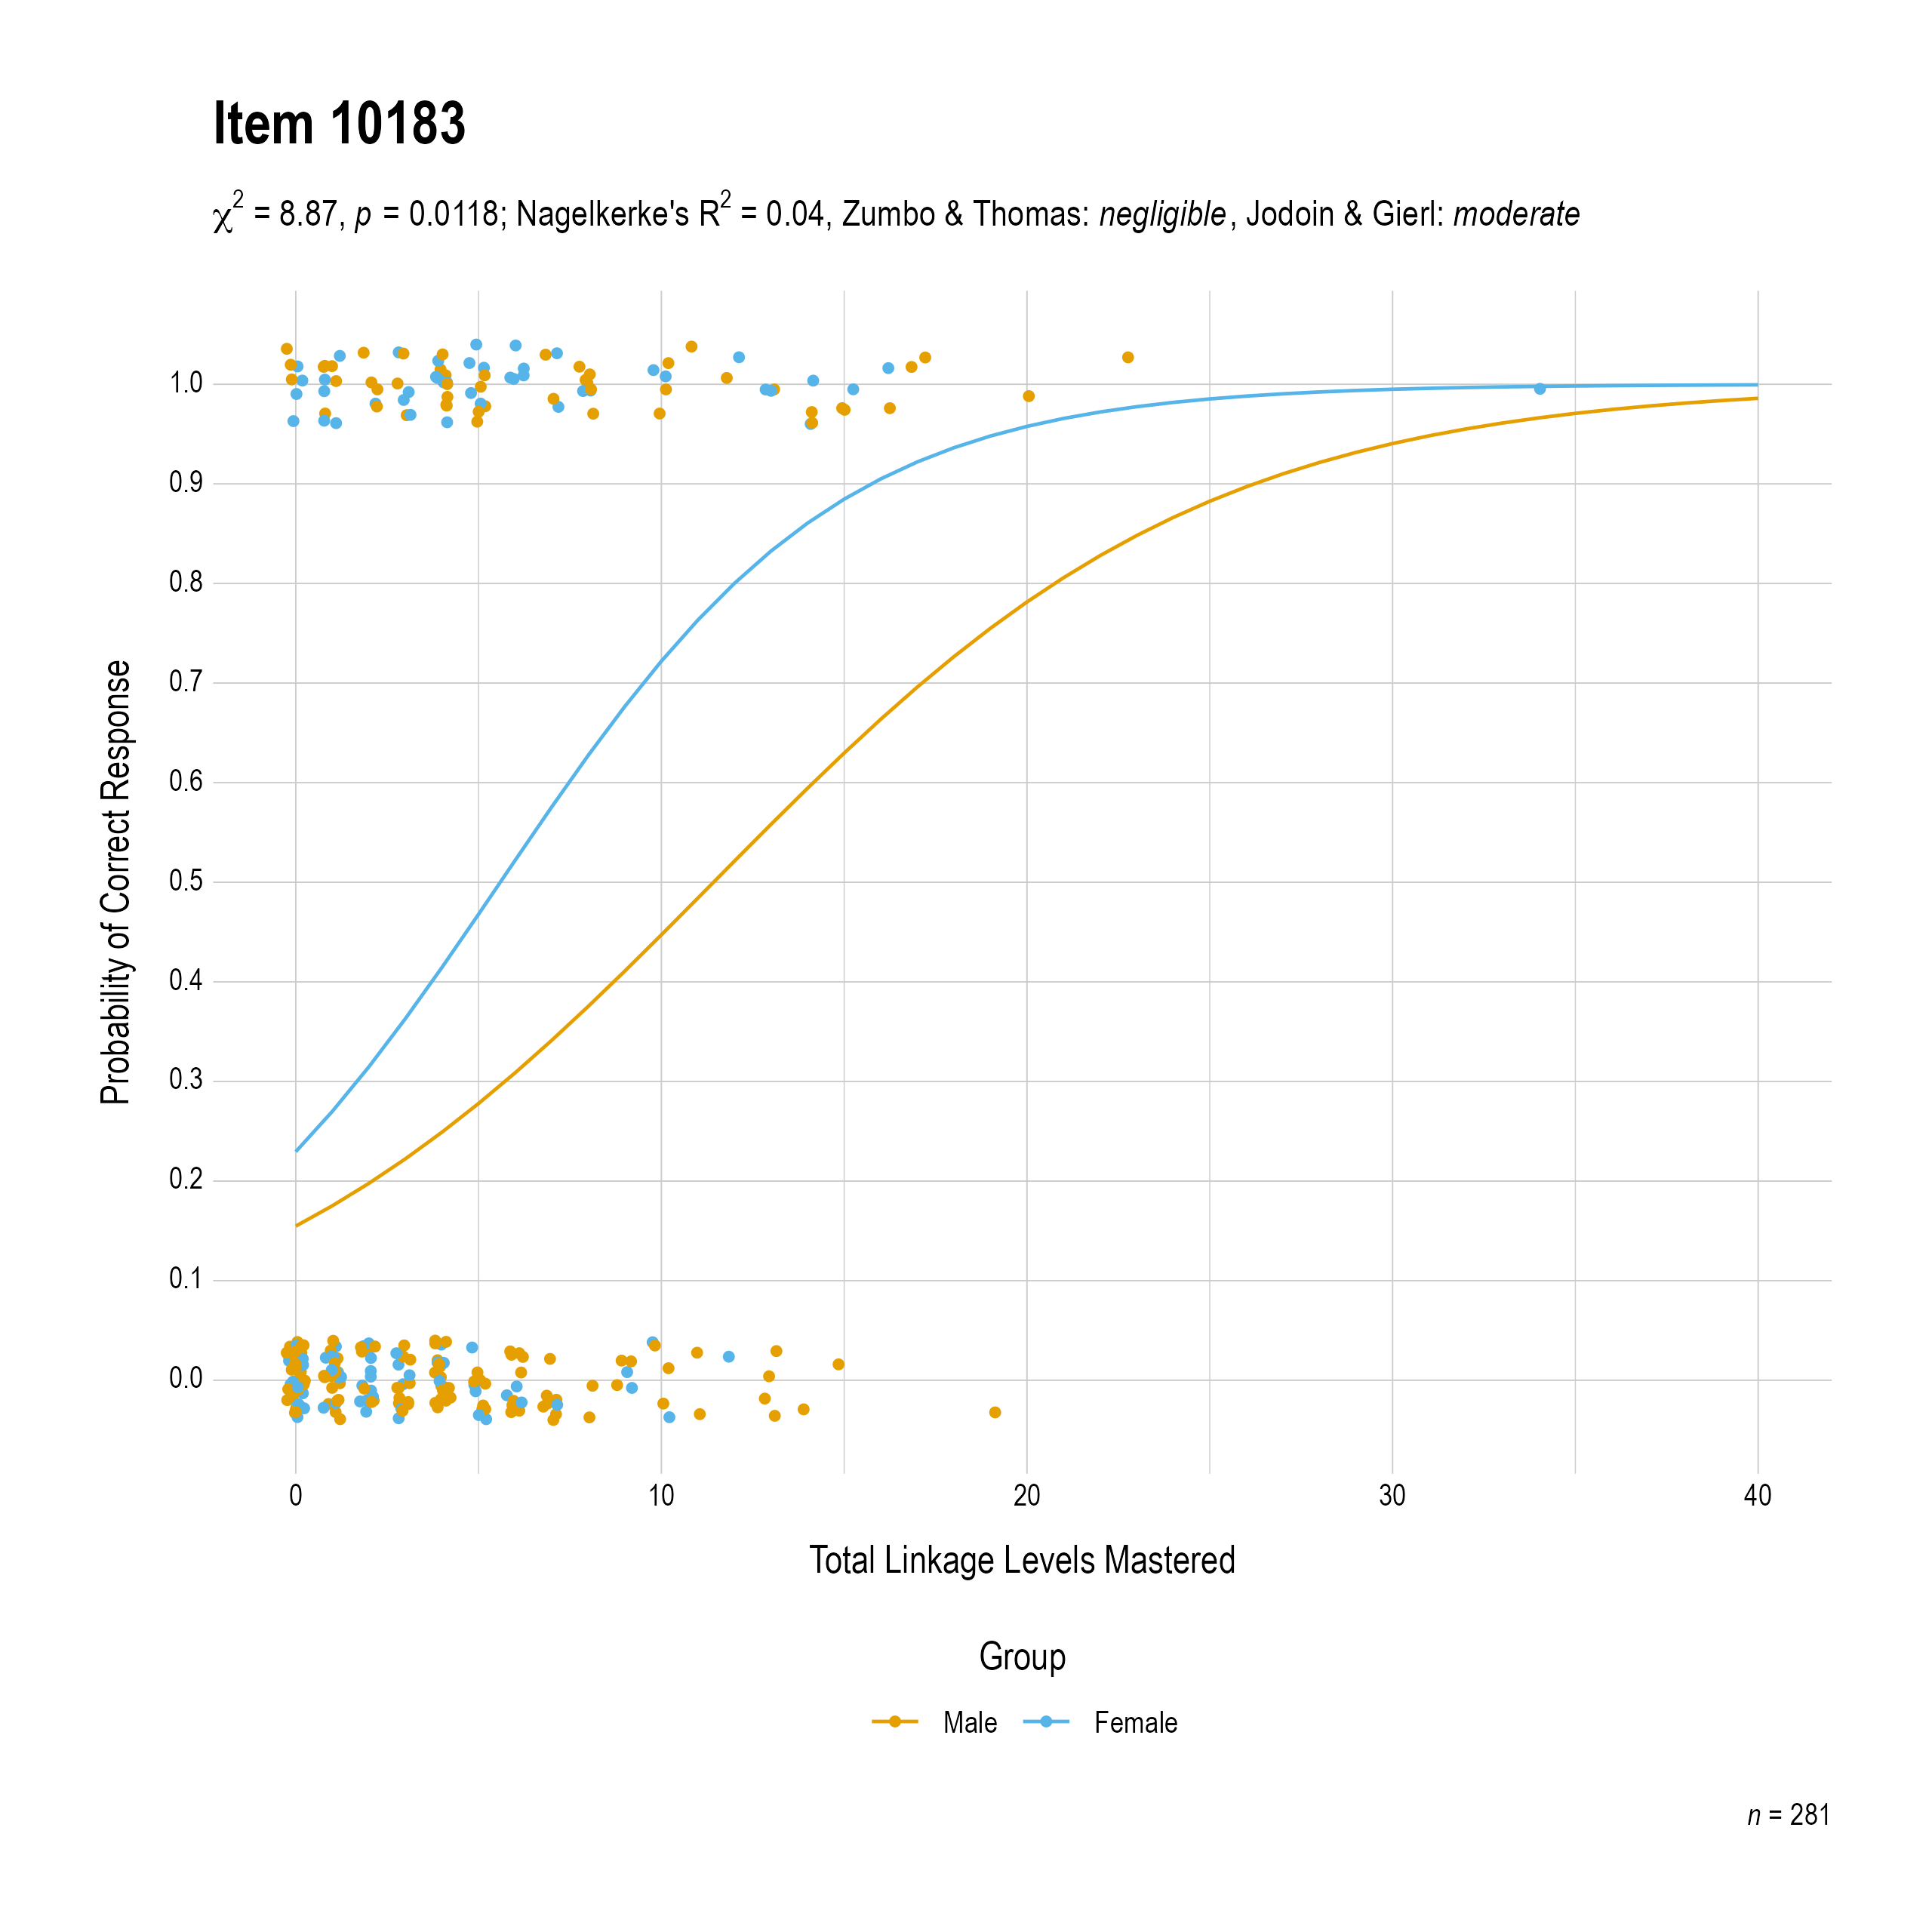 The plot of the combined gender differential item function evidence for English language arts item 10183. The figure contains points shaded by group. The figure also contains a logistic regression curve for each group. The total linkage levels mastered in is on the x-axis, and the probability of a correct response is on the y-axis.